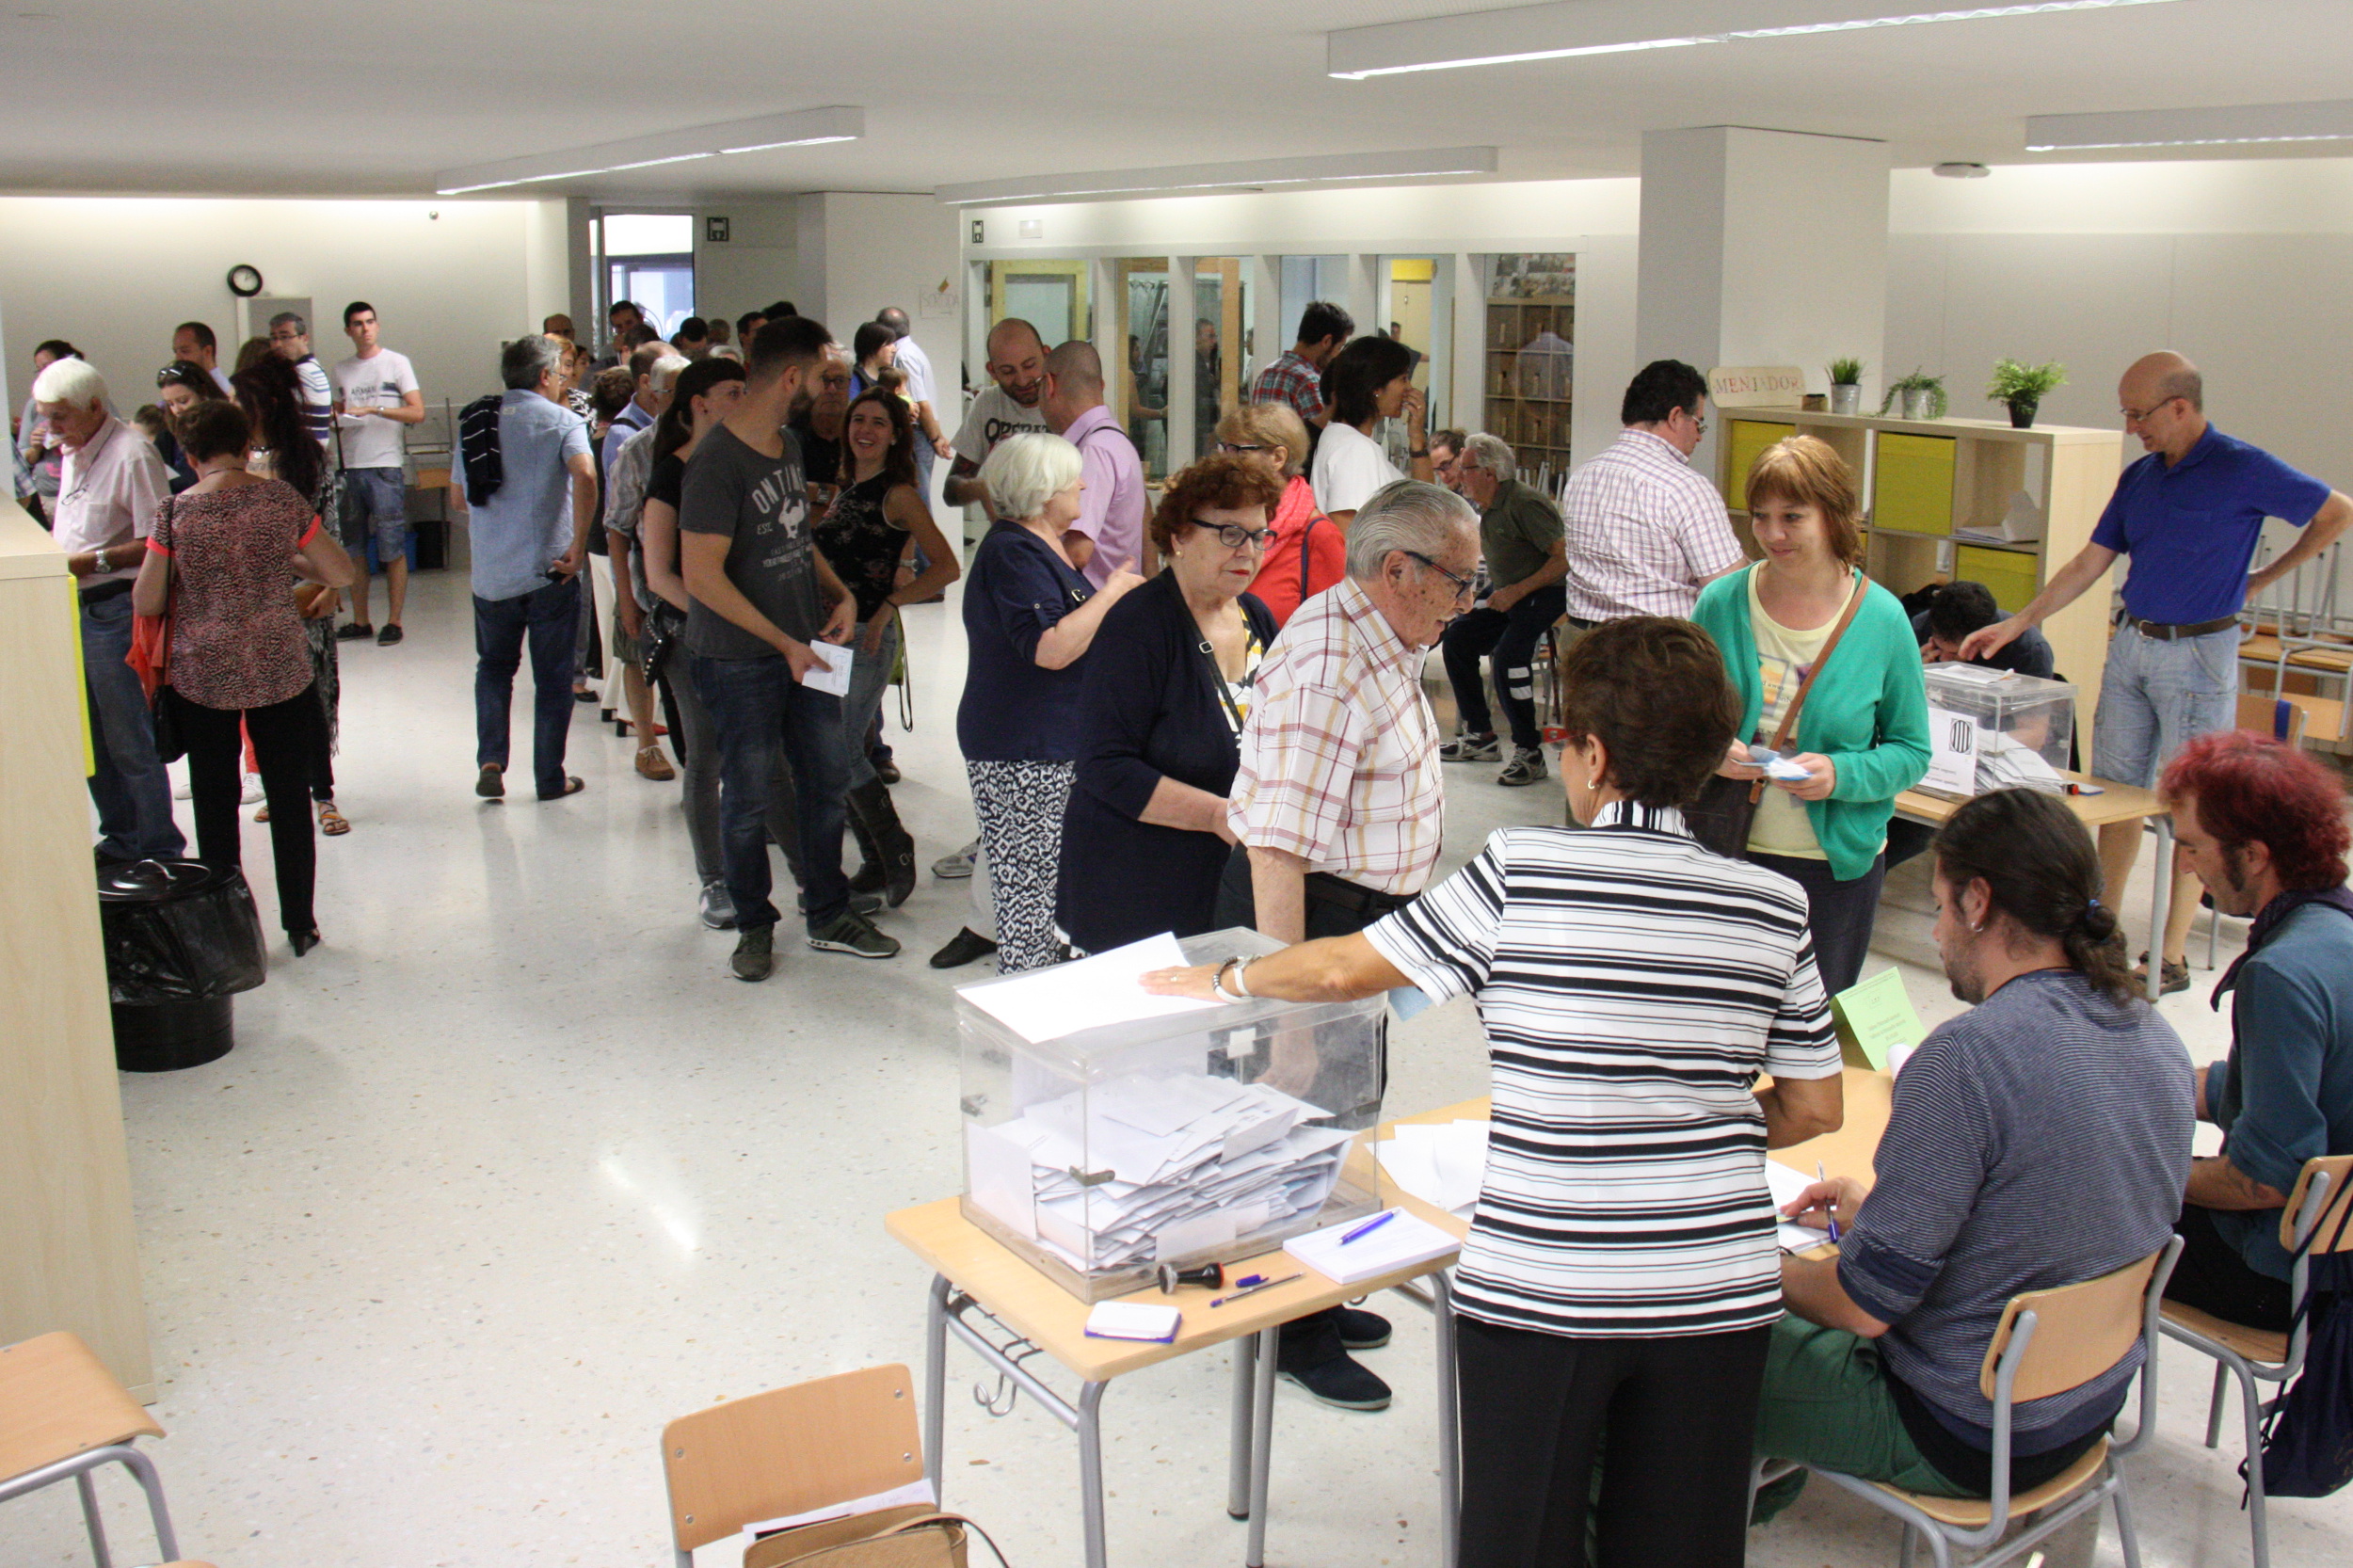 Voters exercising their right a polling station this evening (by ACN)